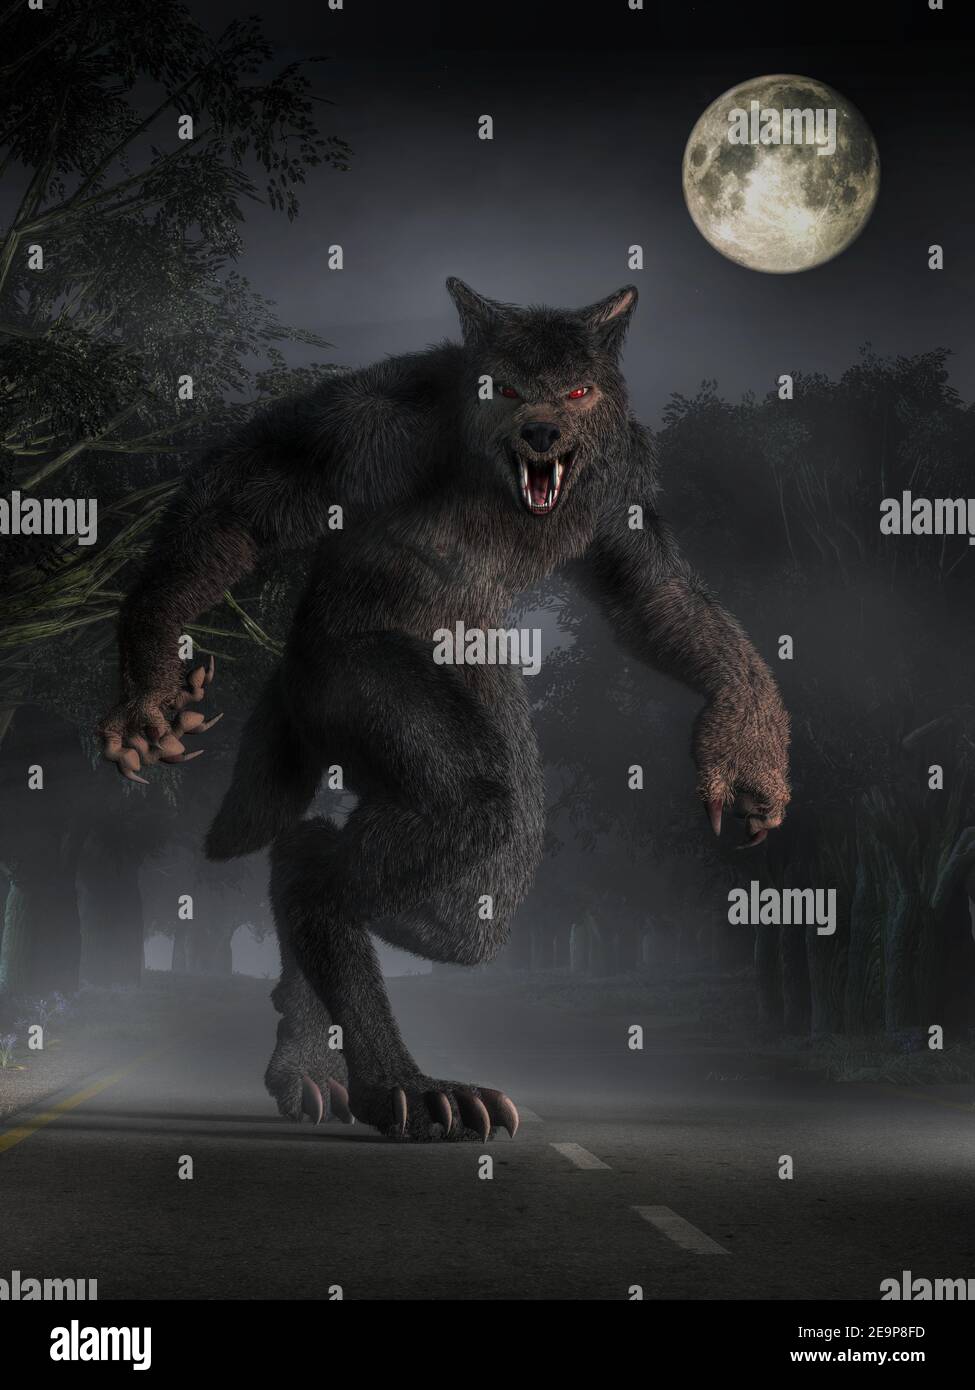 The Beast of Bray Road, a werewolf looking cryptid of Wisconsin folklore, stands in the moonlight on the road before you glaring with a menacing look. Stock Photo